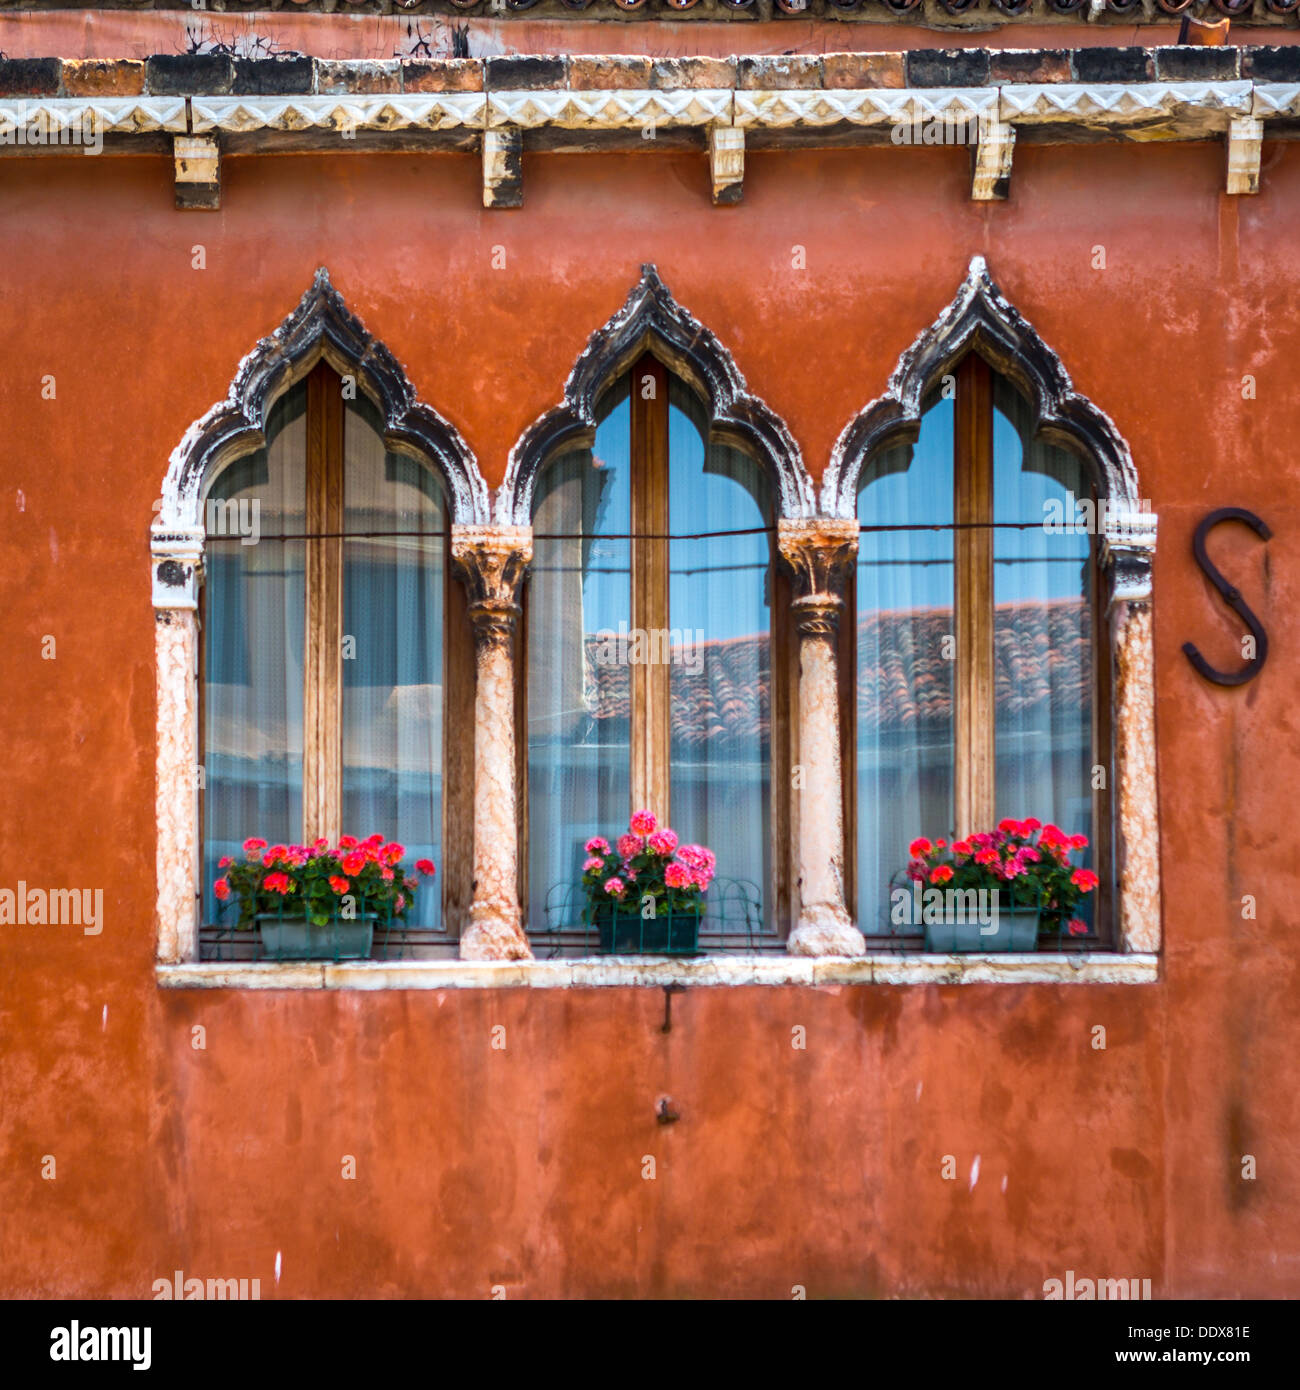 Typical windows and a colorful wall in Murano, Venice, Italy Stock Photo